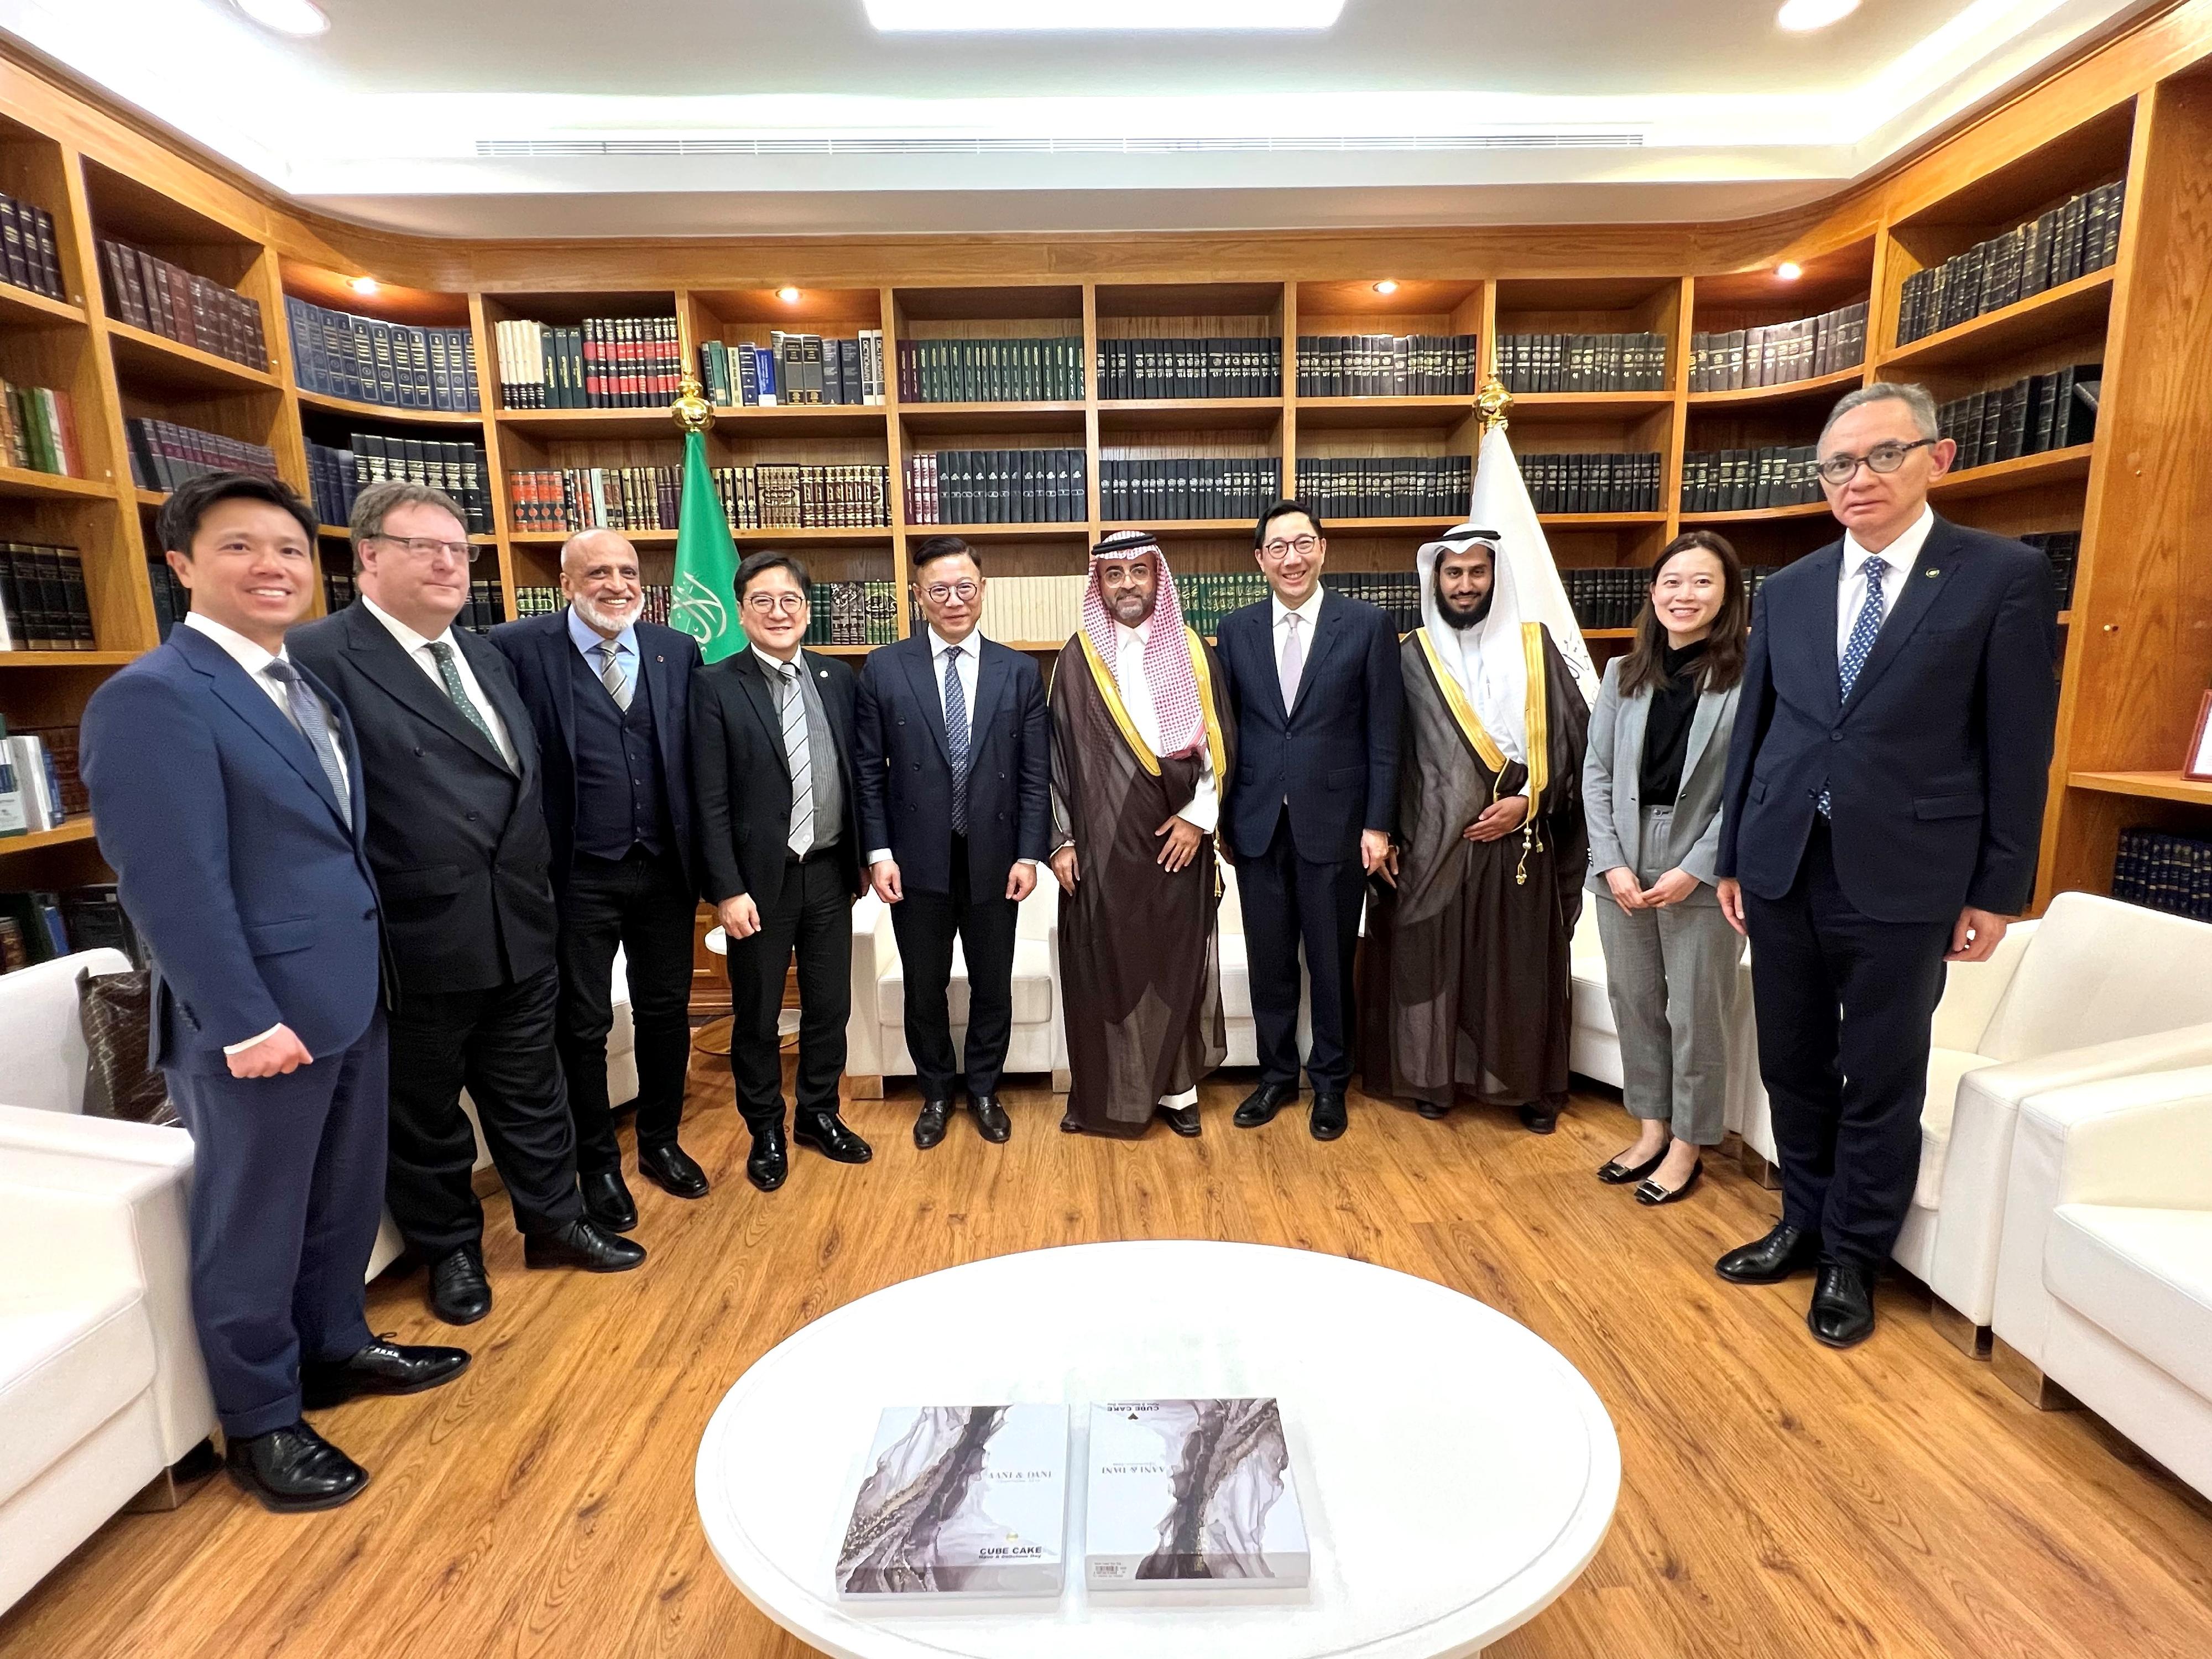 The Deputy Secretary for Justice, Mr Cheung Kwok-kwan, and the delegation meet with representatives of the Saudi Bar Association, in Riyadh, Saudi Arabia, on March 6 (Riyadh time). Photo shows Mr Cheung (fifth left), and the delegation with the representatives from the Saudi Bar Association.